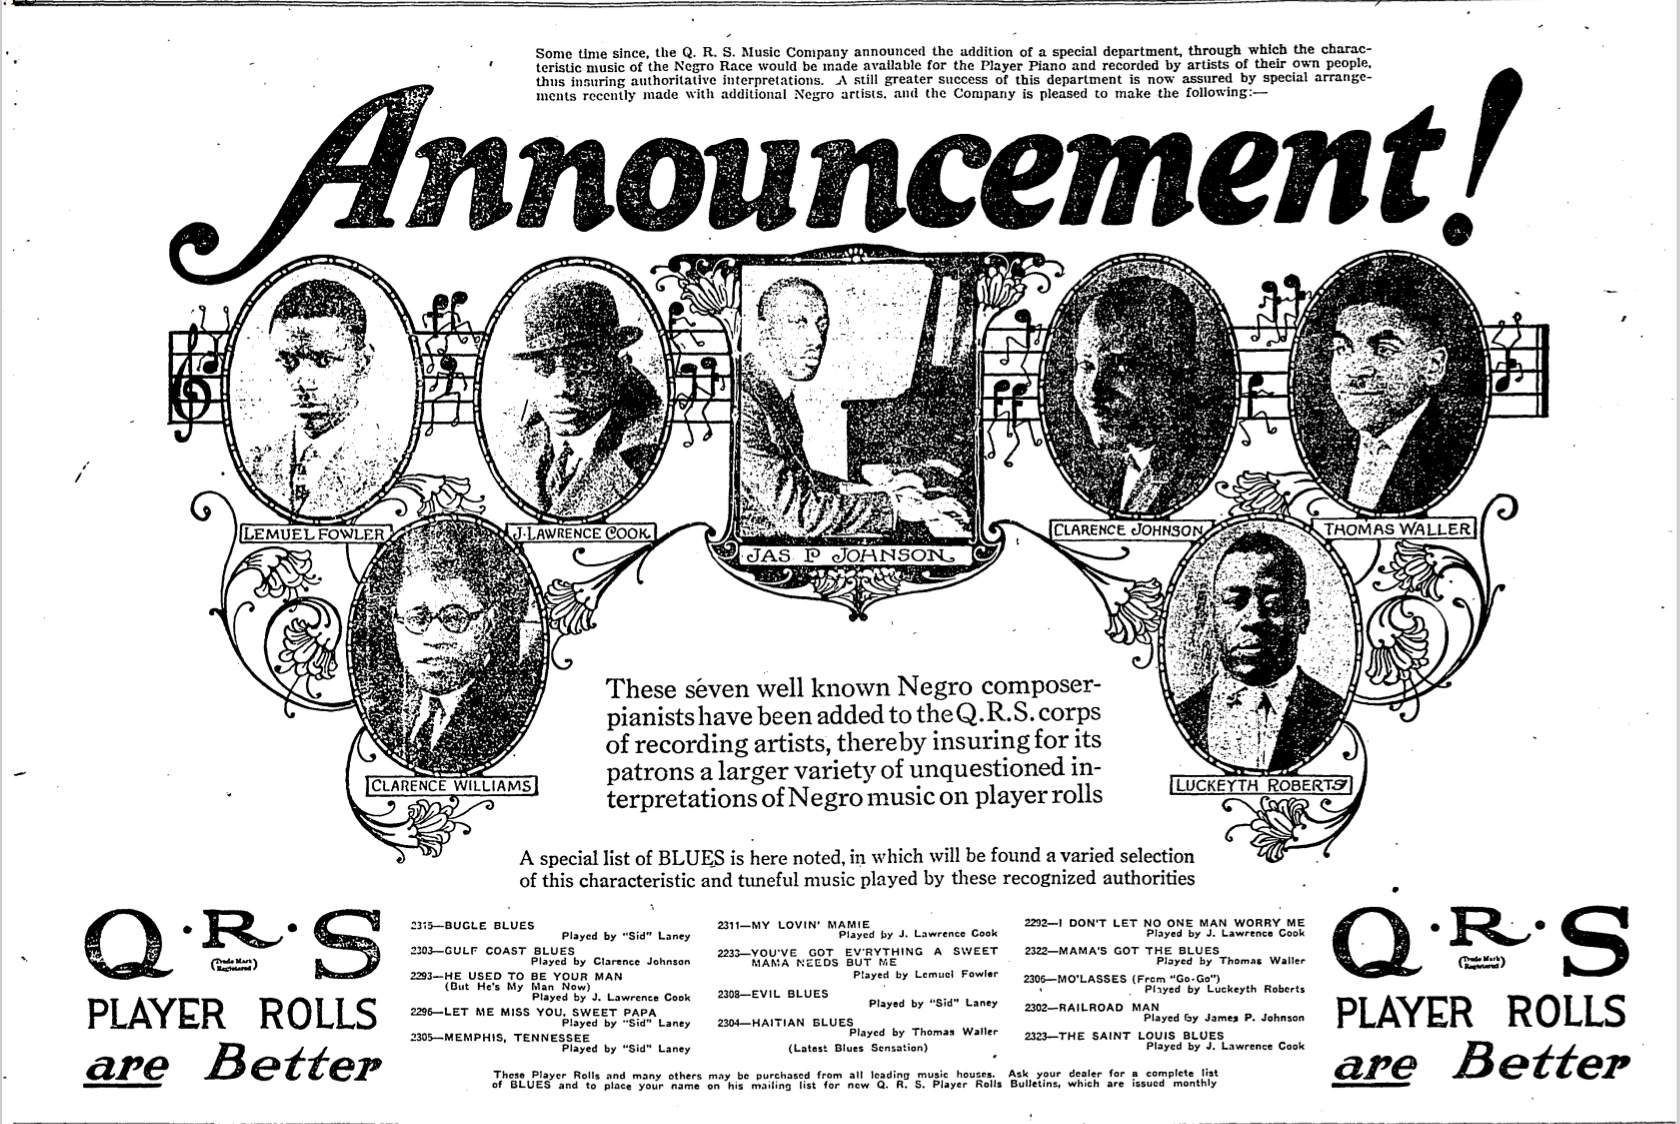 Attention! QRS display ad for African-American newspapers, summer 1923